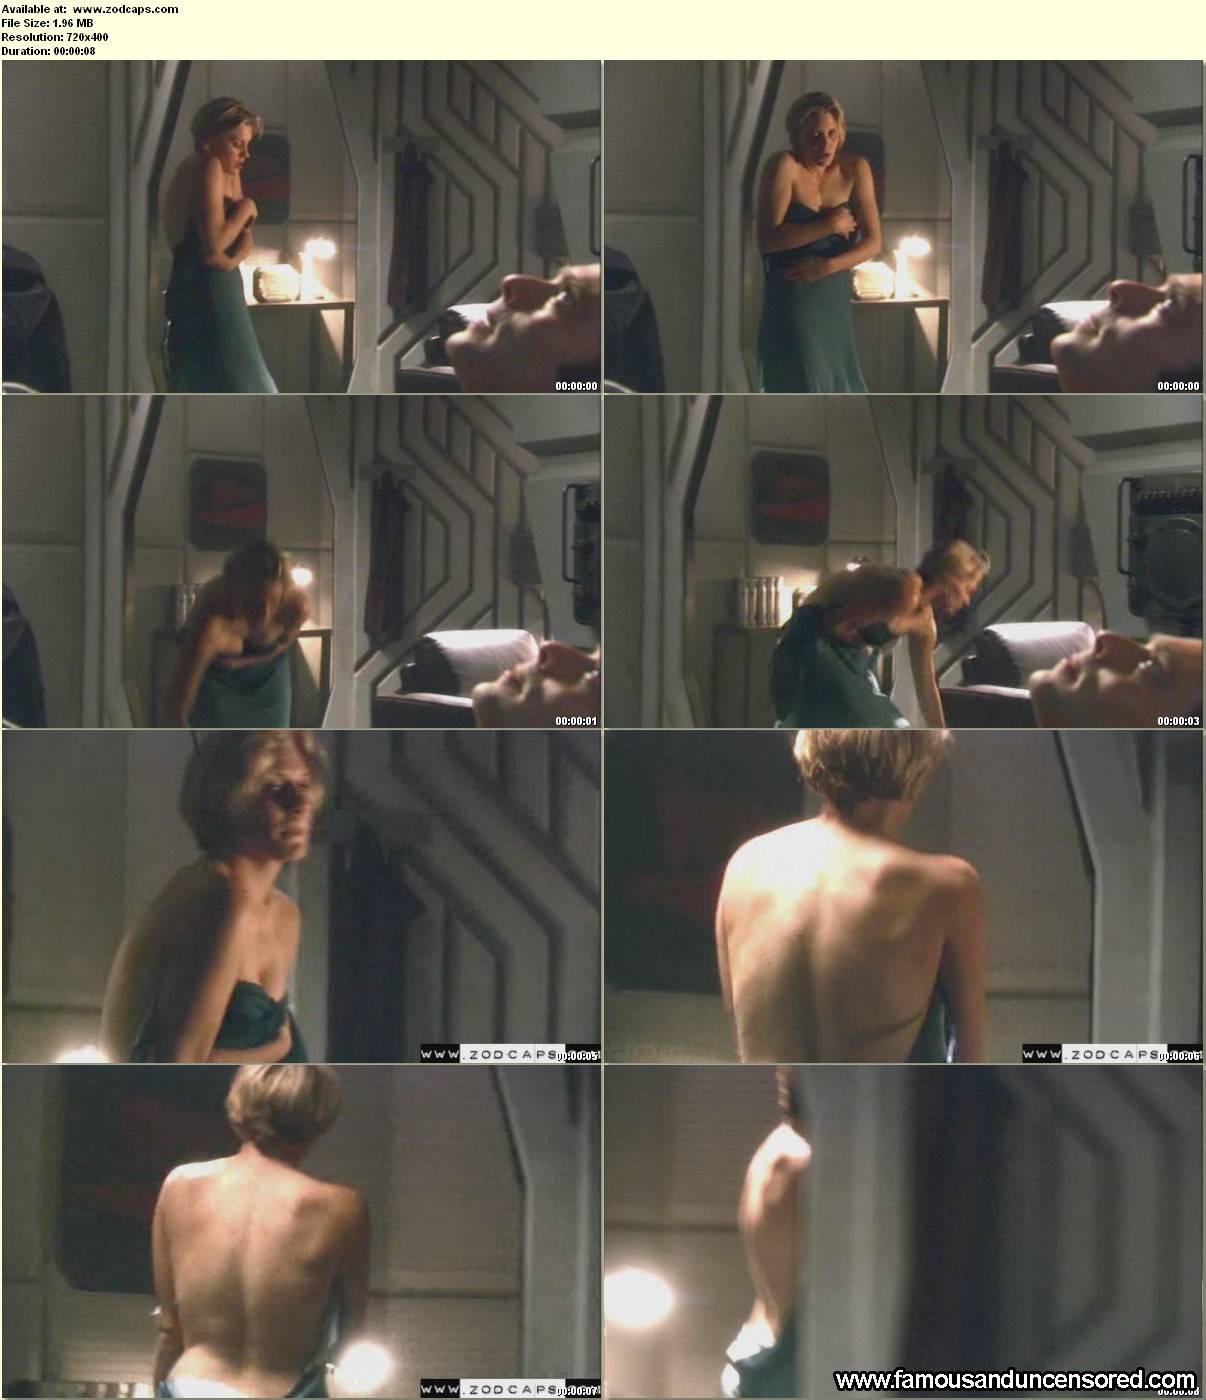 find more porn picture nackte katee sackhoff in battlestar galactica, grace...